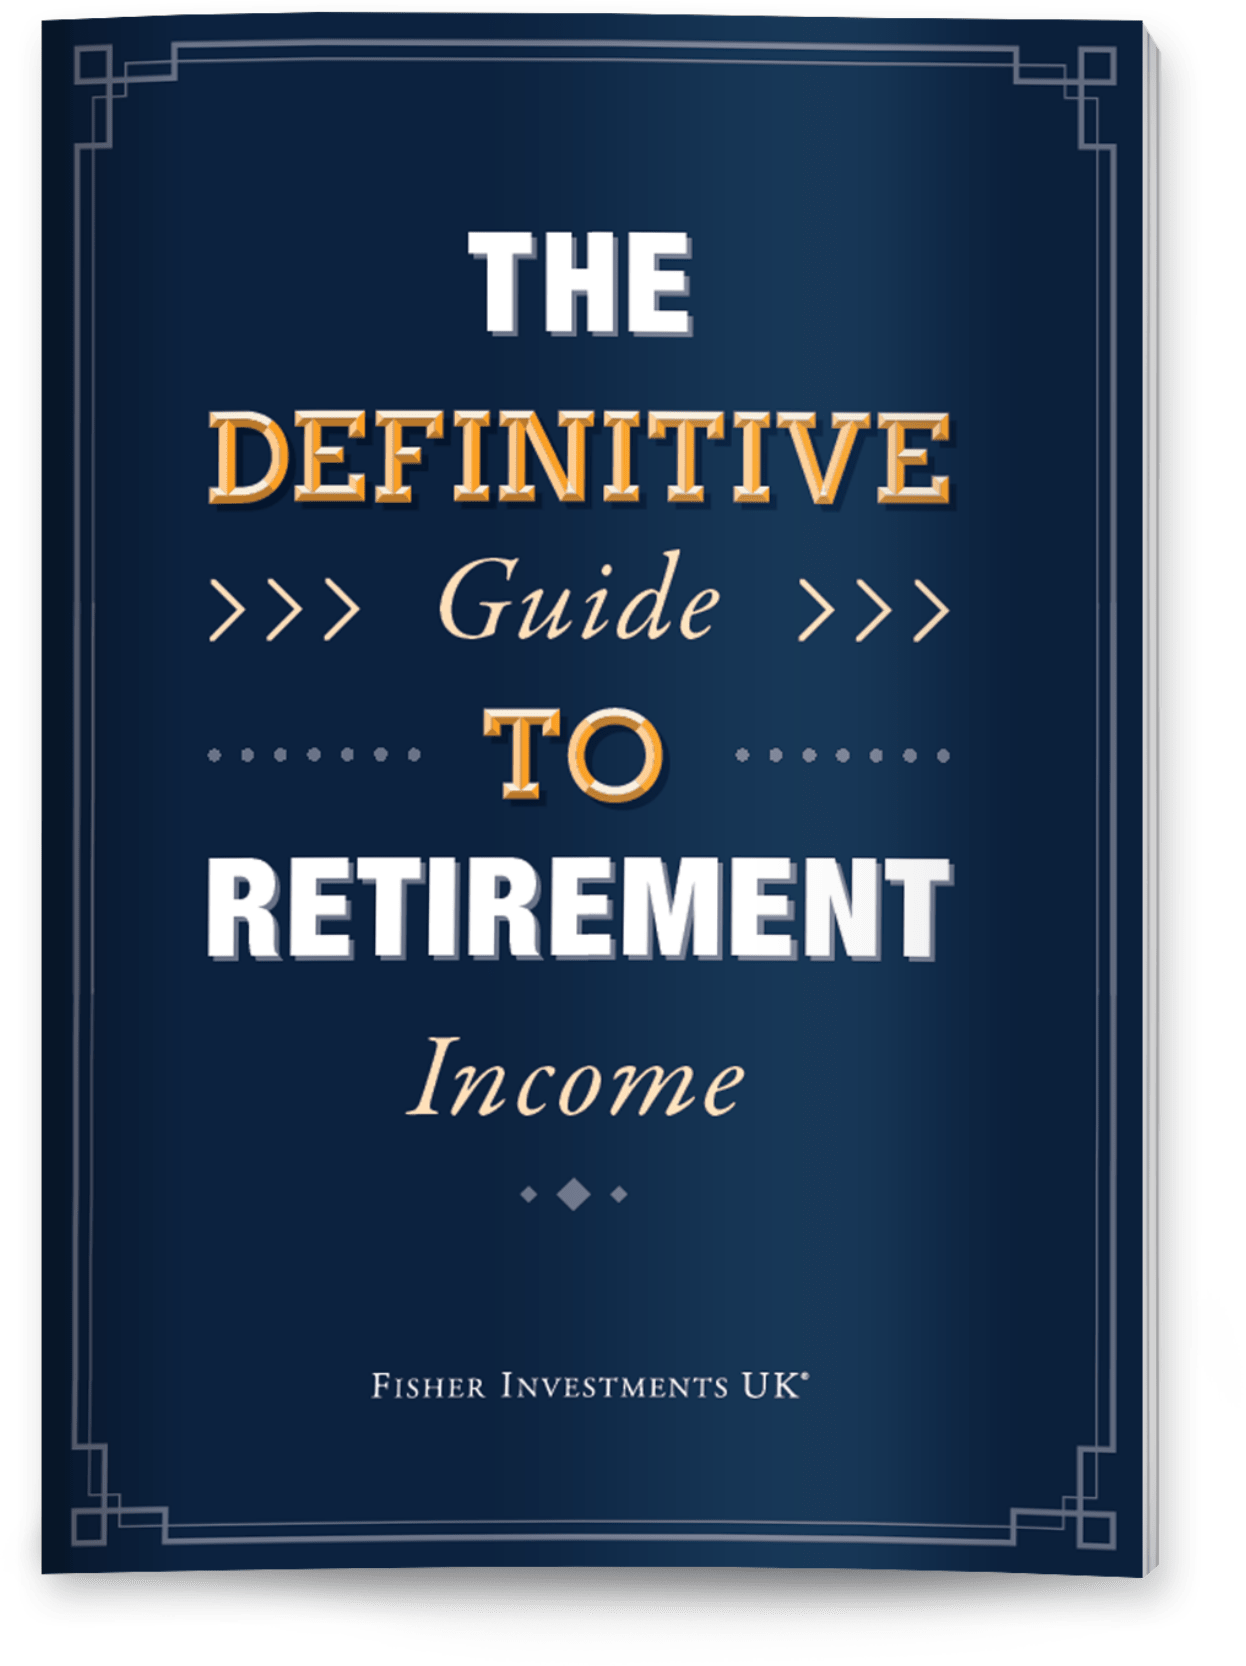 Definitive Guide to Retirement Fisher Investments UK